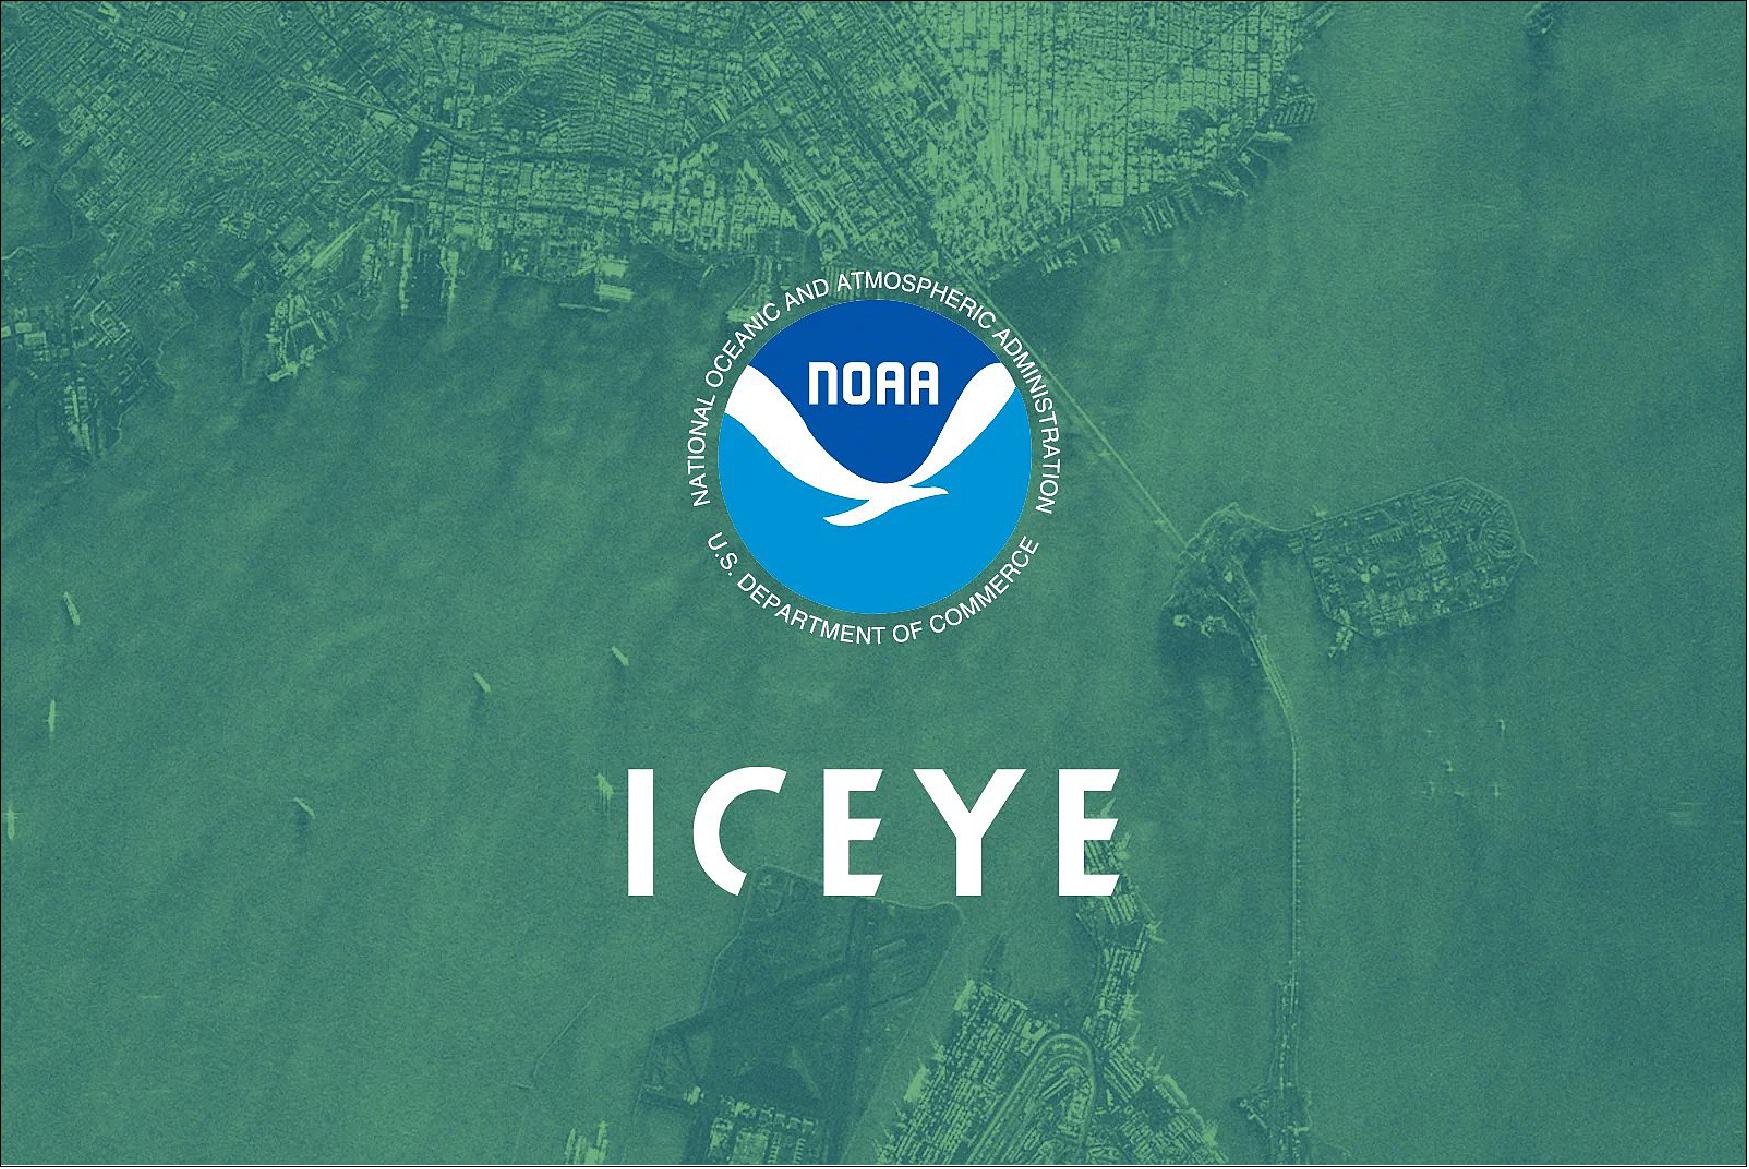 Figure 22: NOAA and ICEYE logos with ICEYE's radar satellite image of San-Francisco, CA, in the background (image credit: ICEYE)